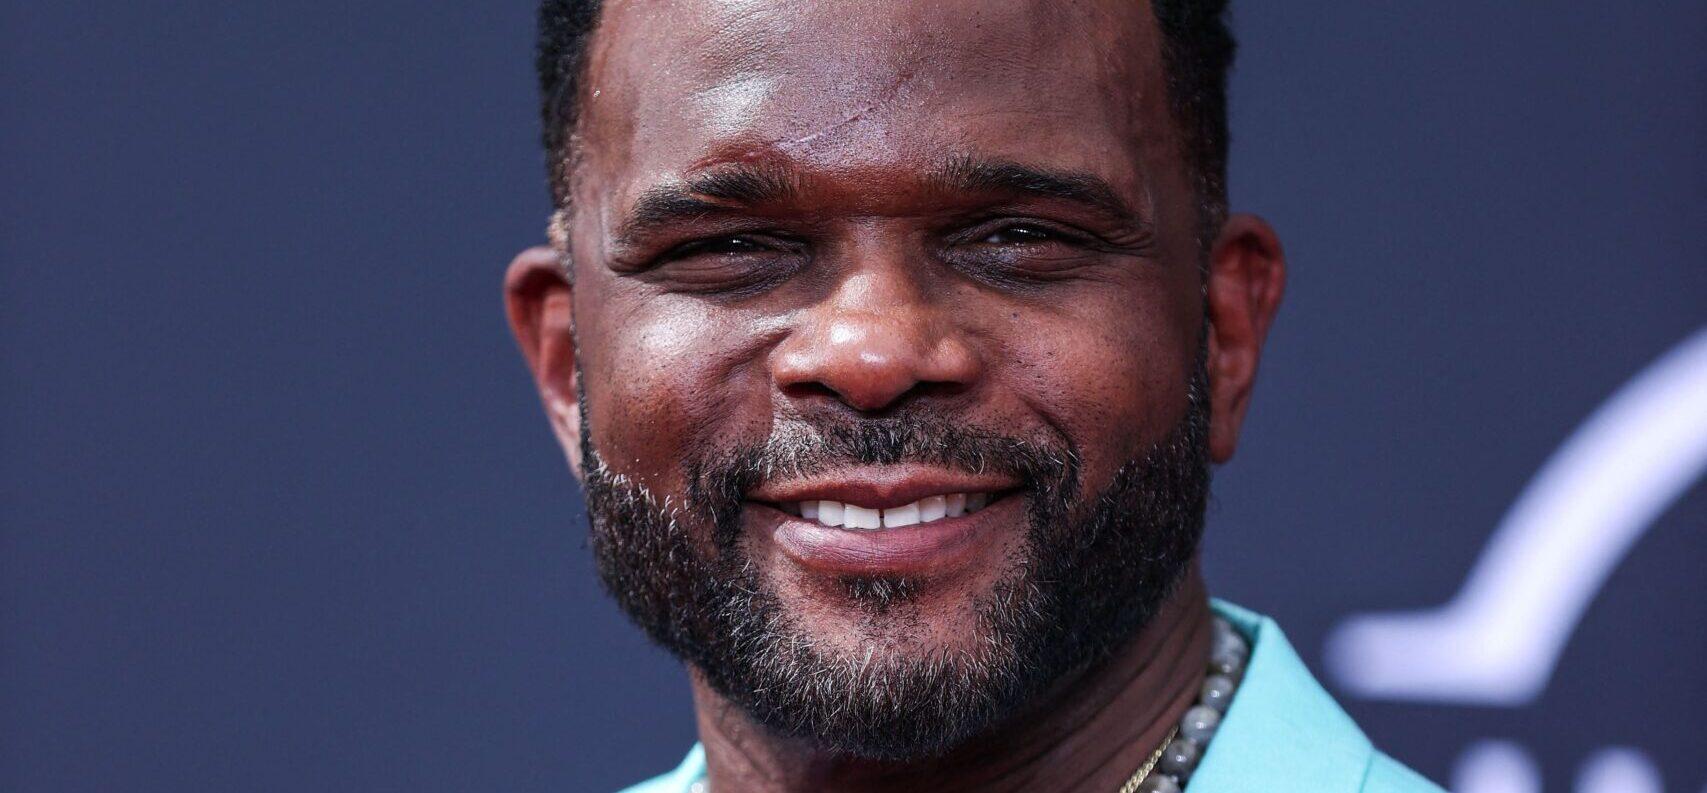 ‘Family Matters’ Star Darius McCrary Arrested Again For Unpaid Child Support